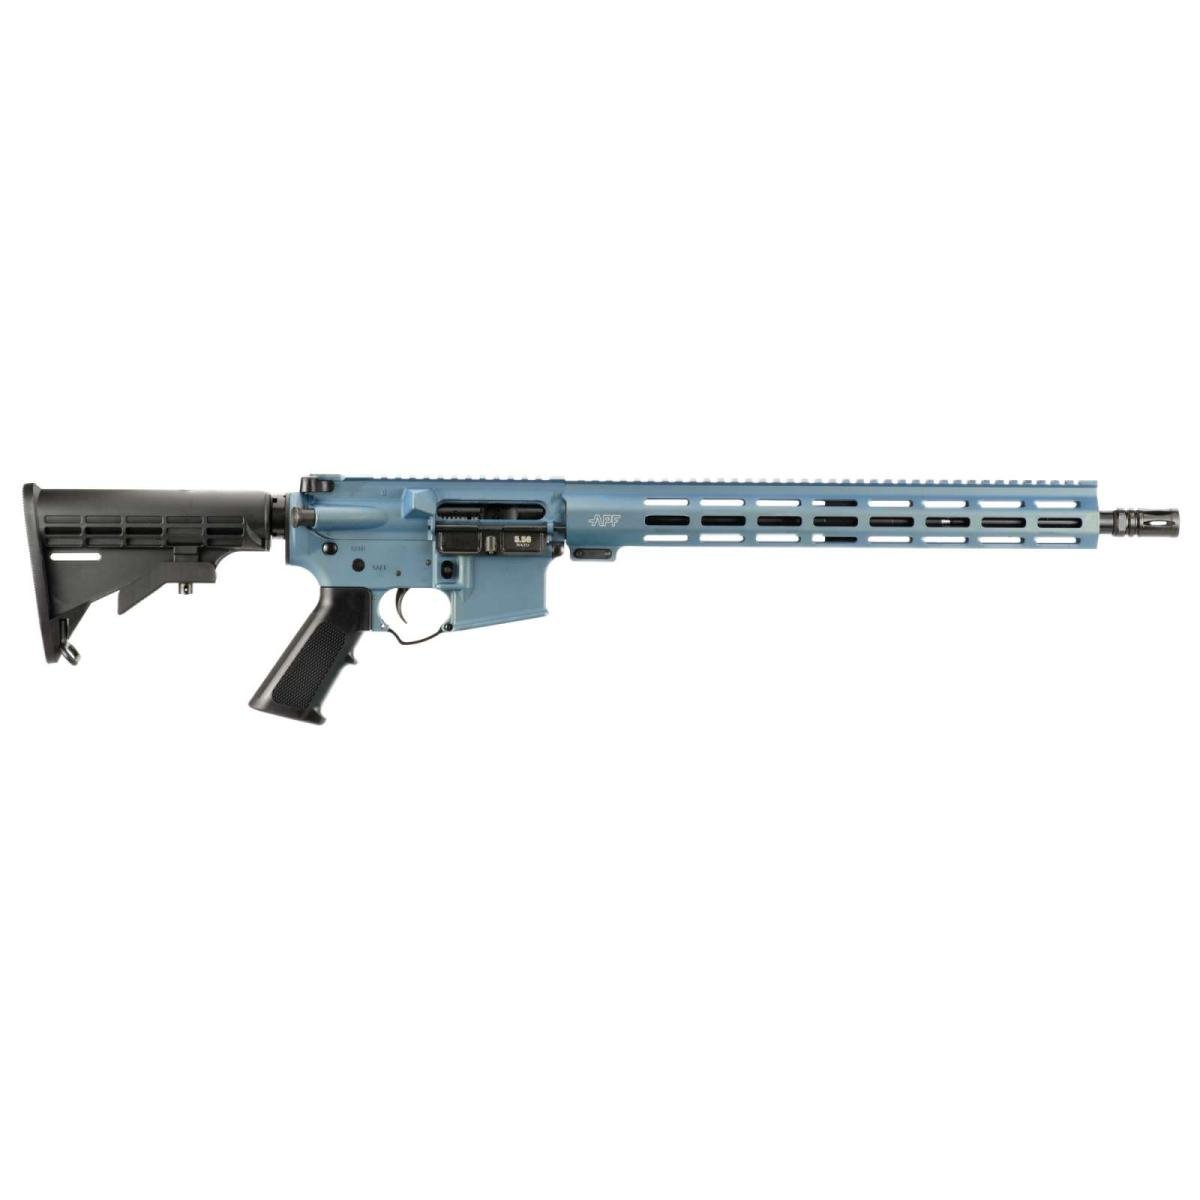 Alex Pro Firearms Guardian AR-15 Rifle 16" OR Northern Lights 223/5.56